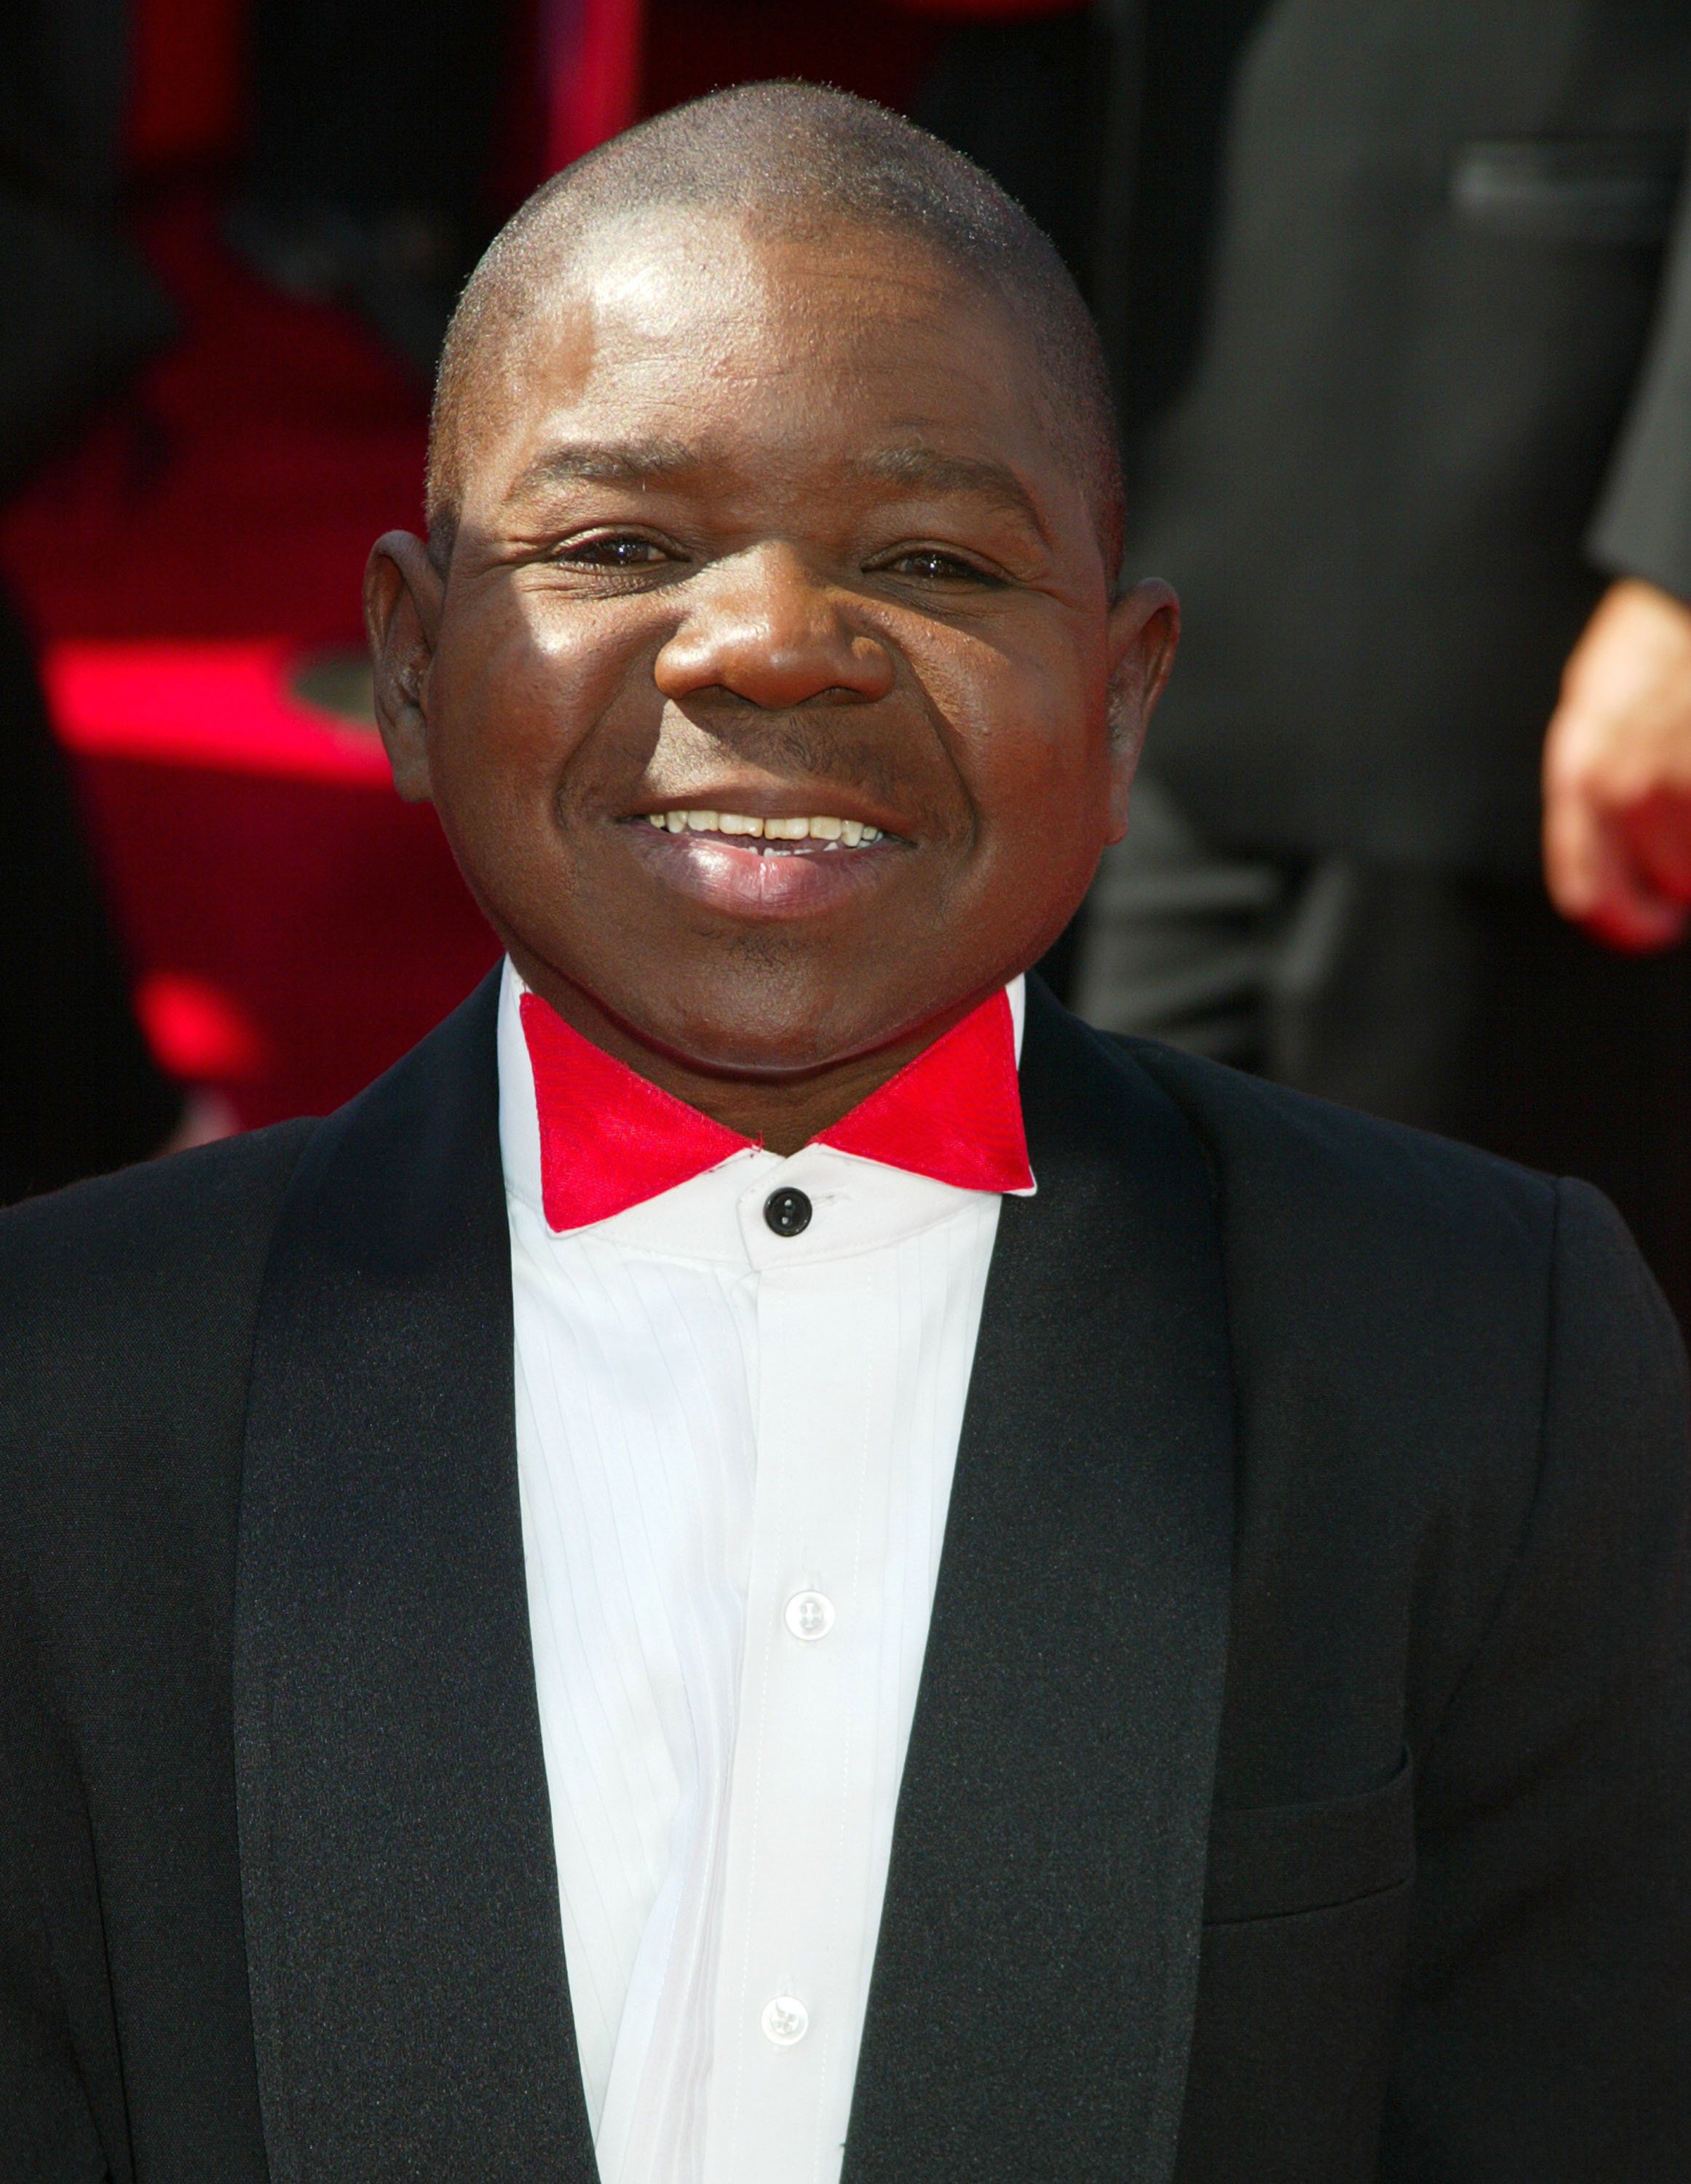 Gary Coleman pictured at The 55th Annual Primetime Emmy Awards, Los Angeles, California. | Photo: Getty Images